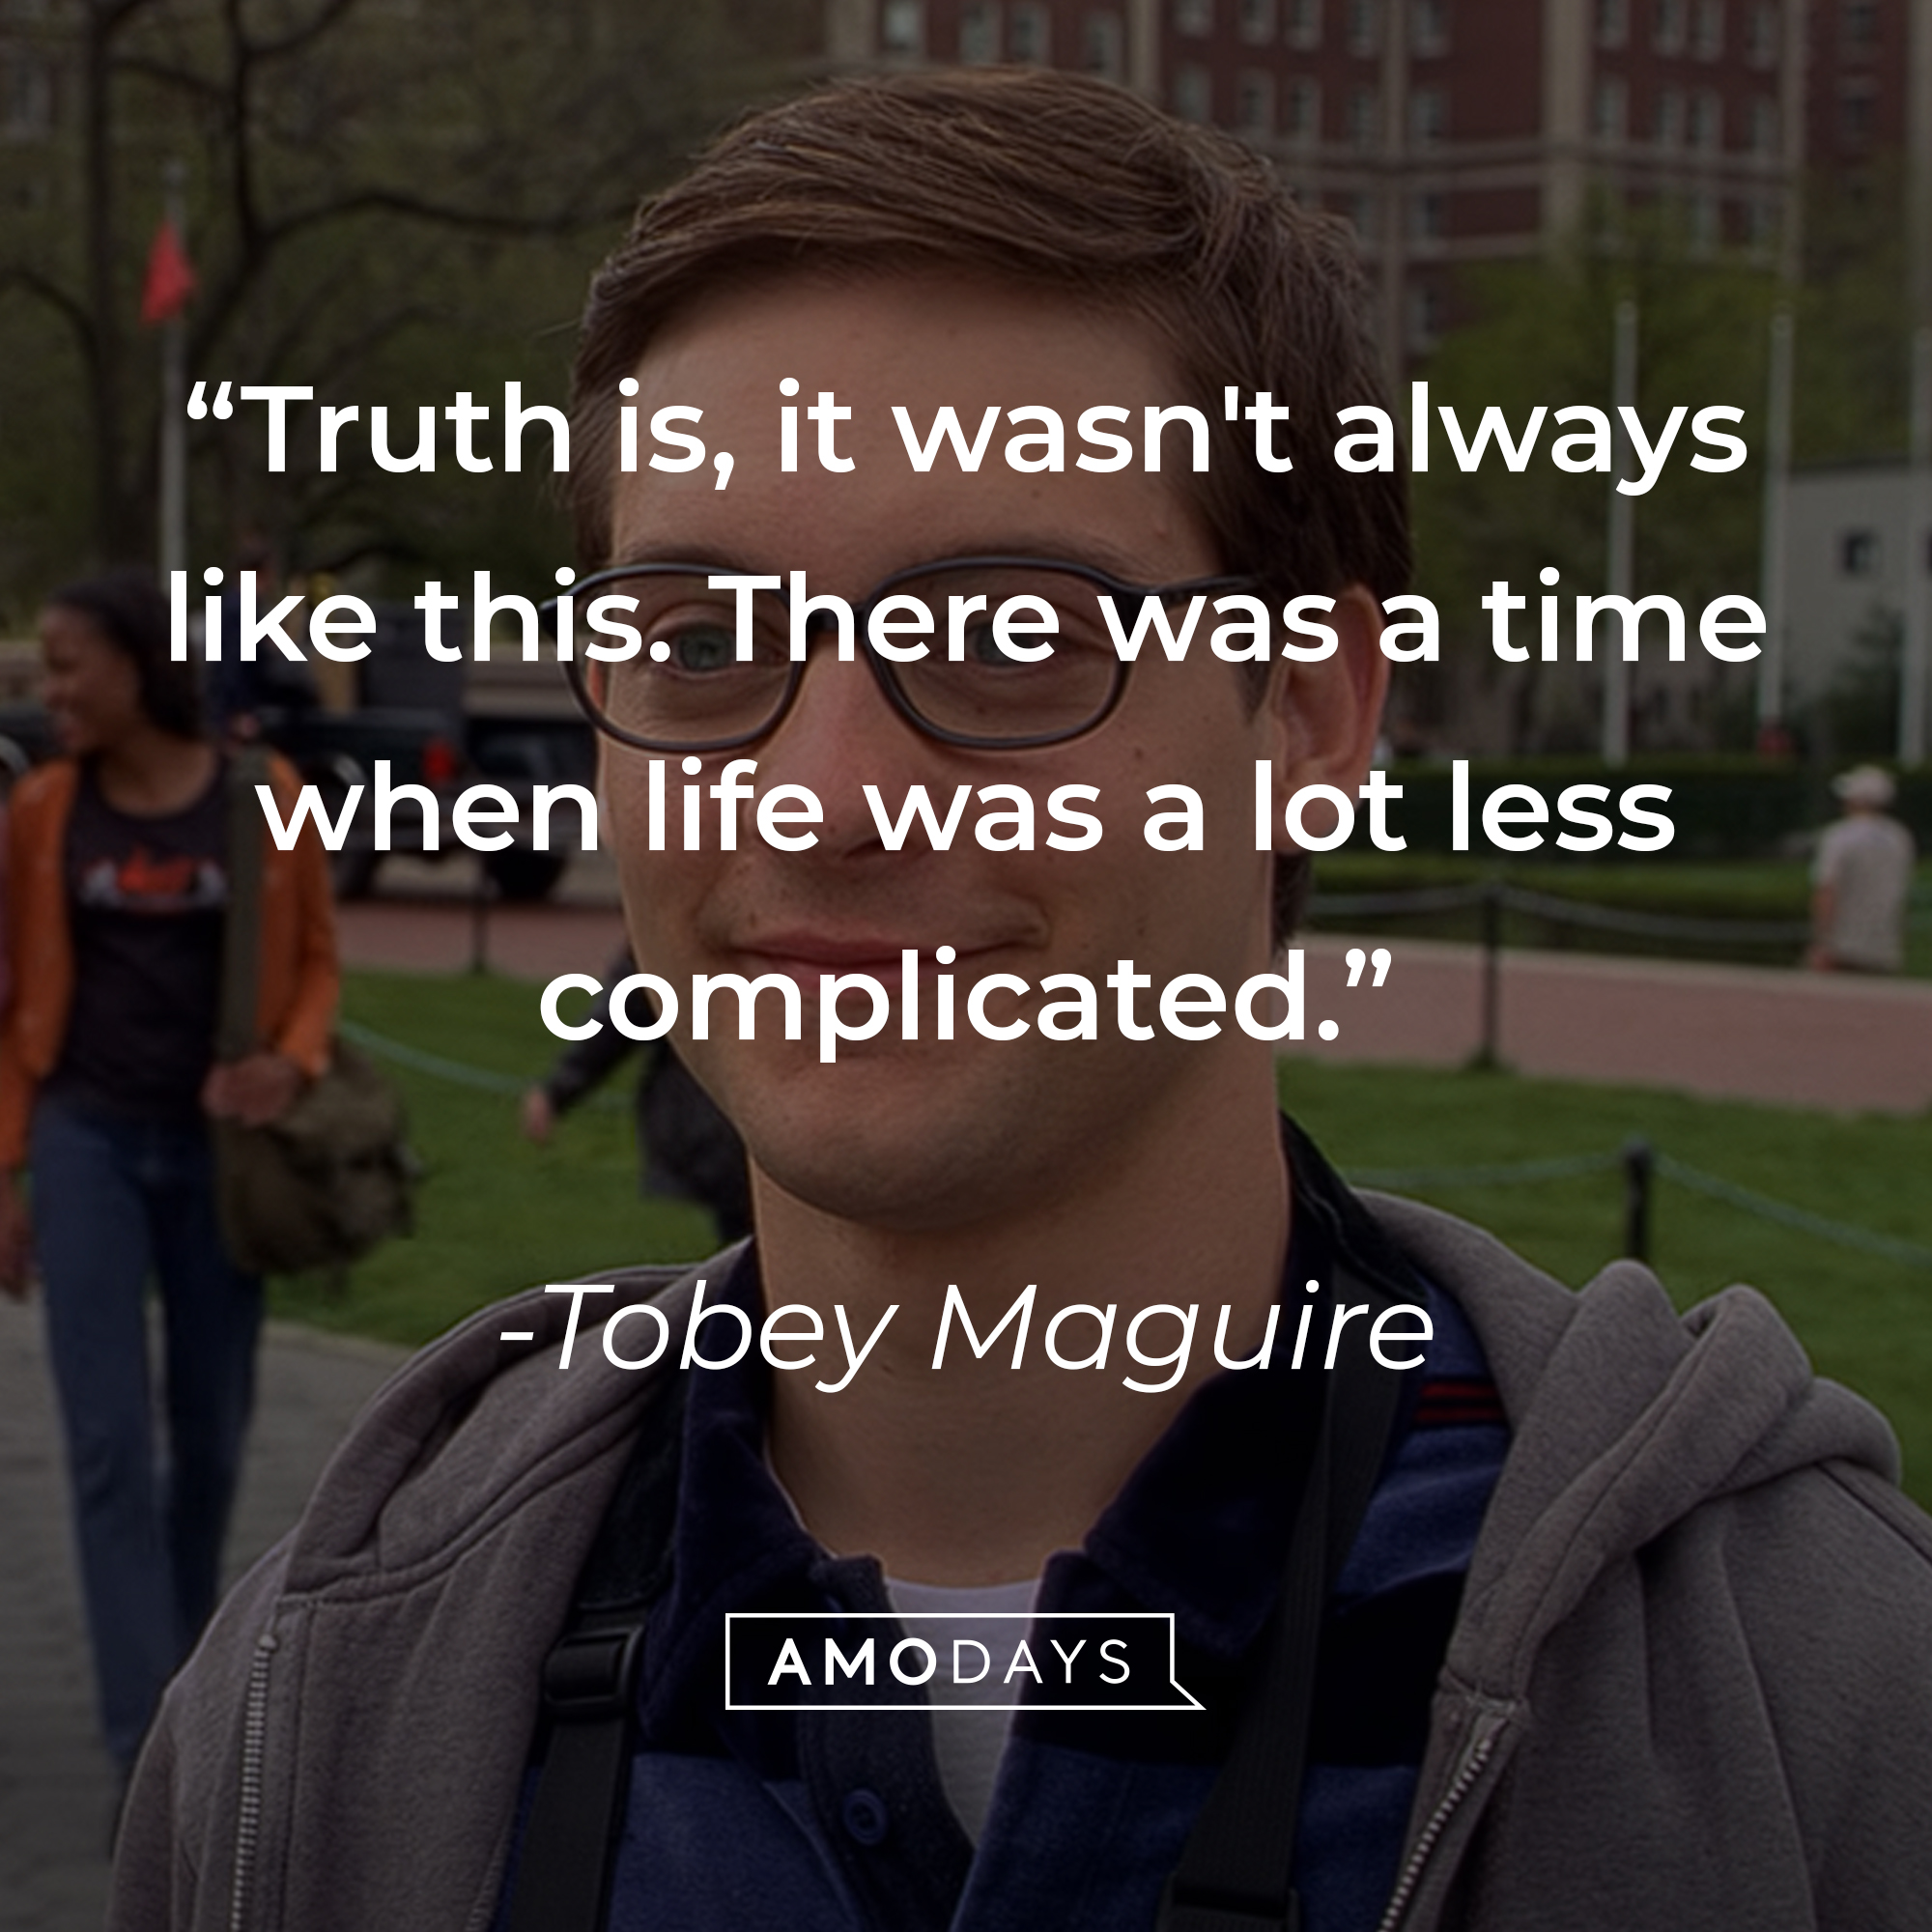 Tobey Maguire's quote: “Truth is, it wasn't always like this. There was a time when life was a lot less complicated.” | Source: youtube.com/sonypictures